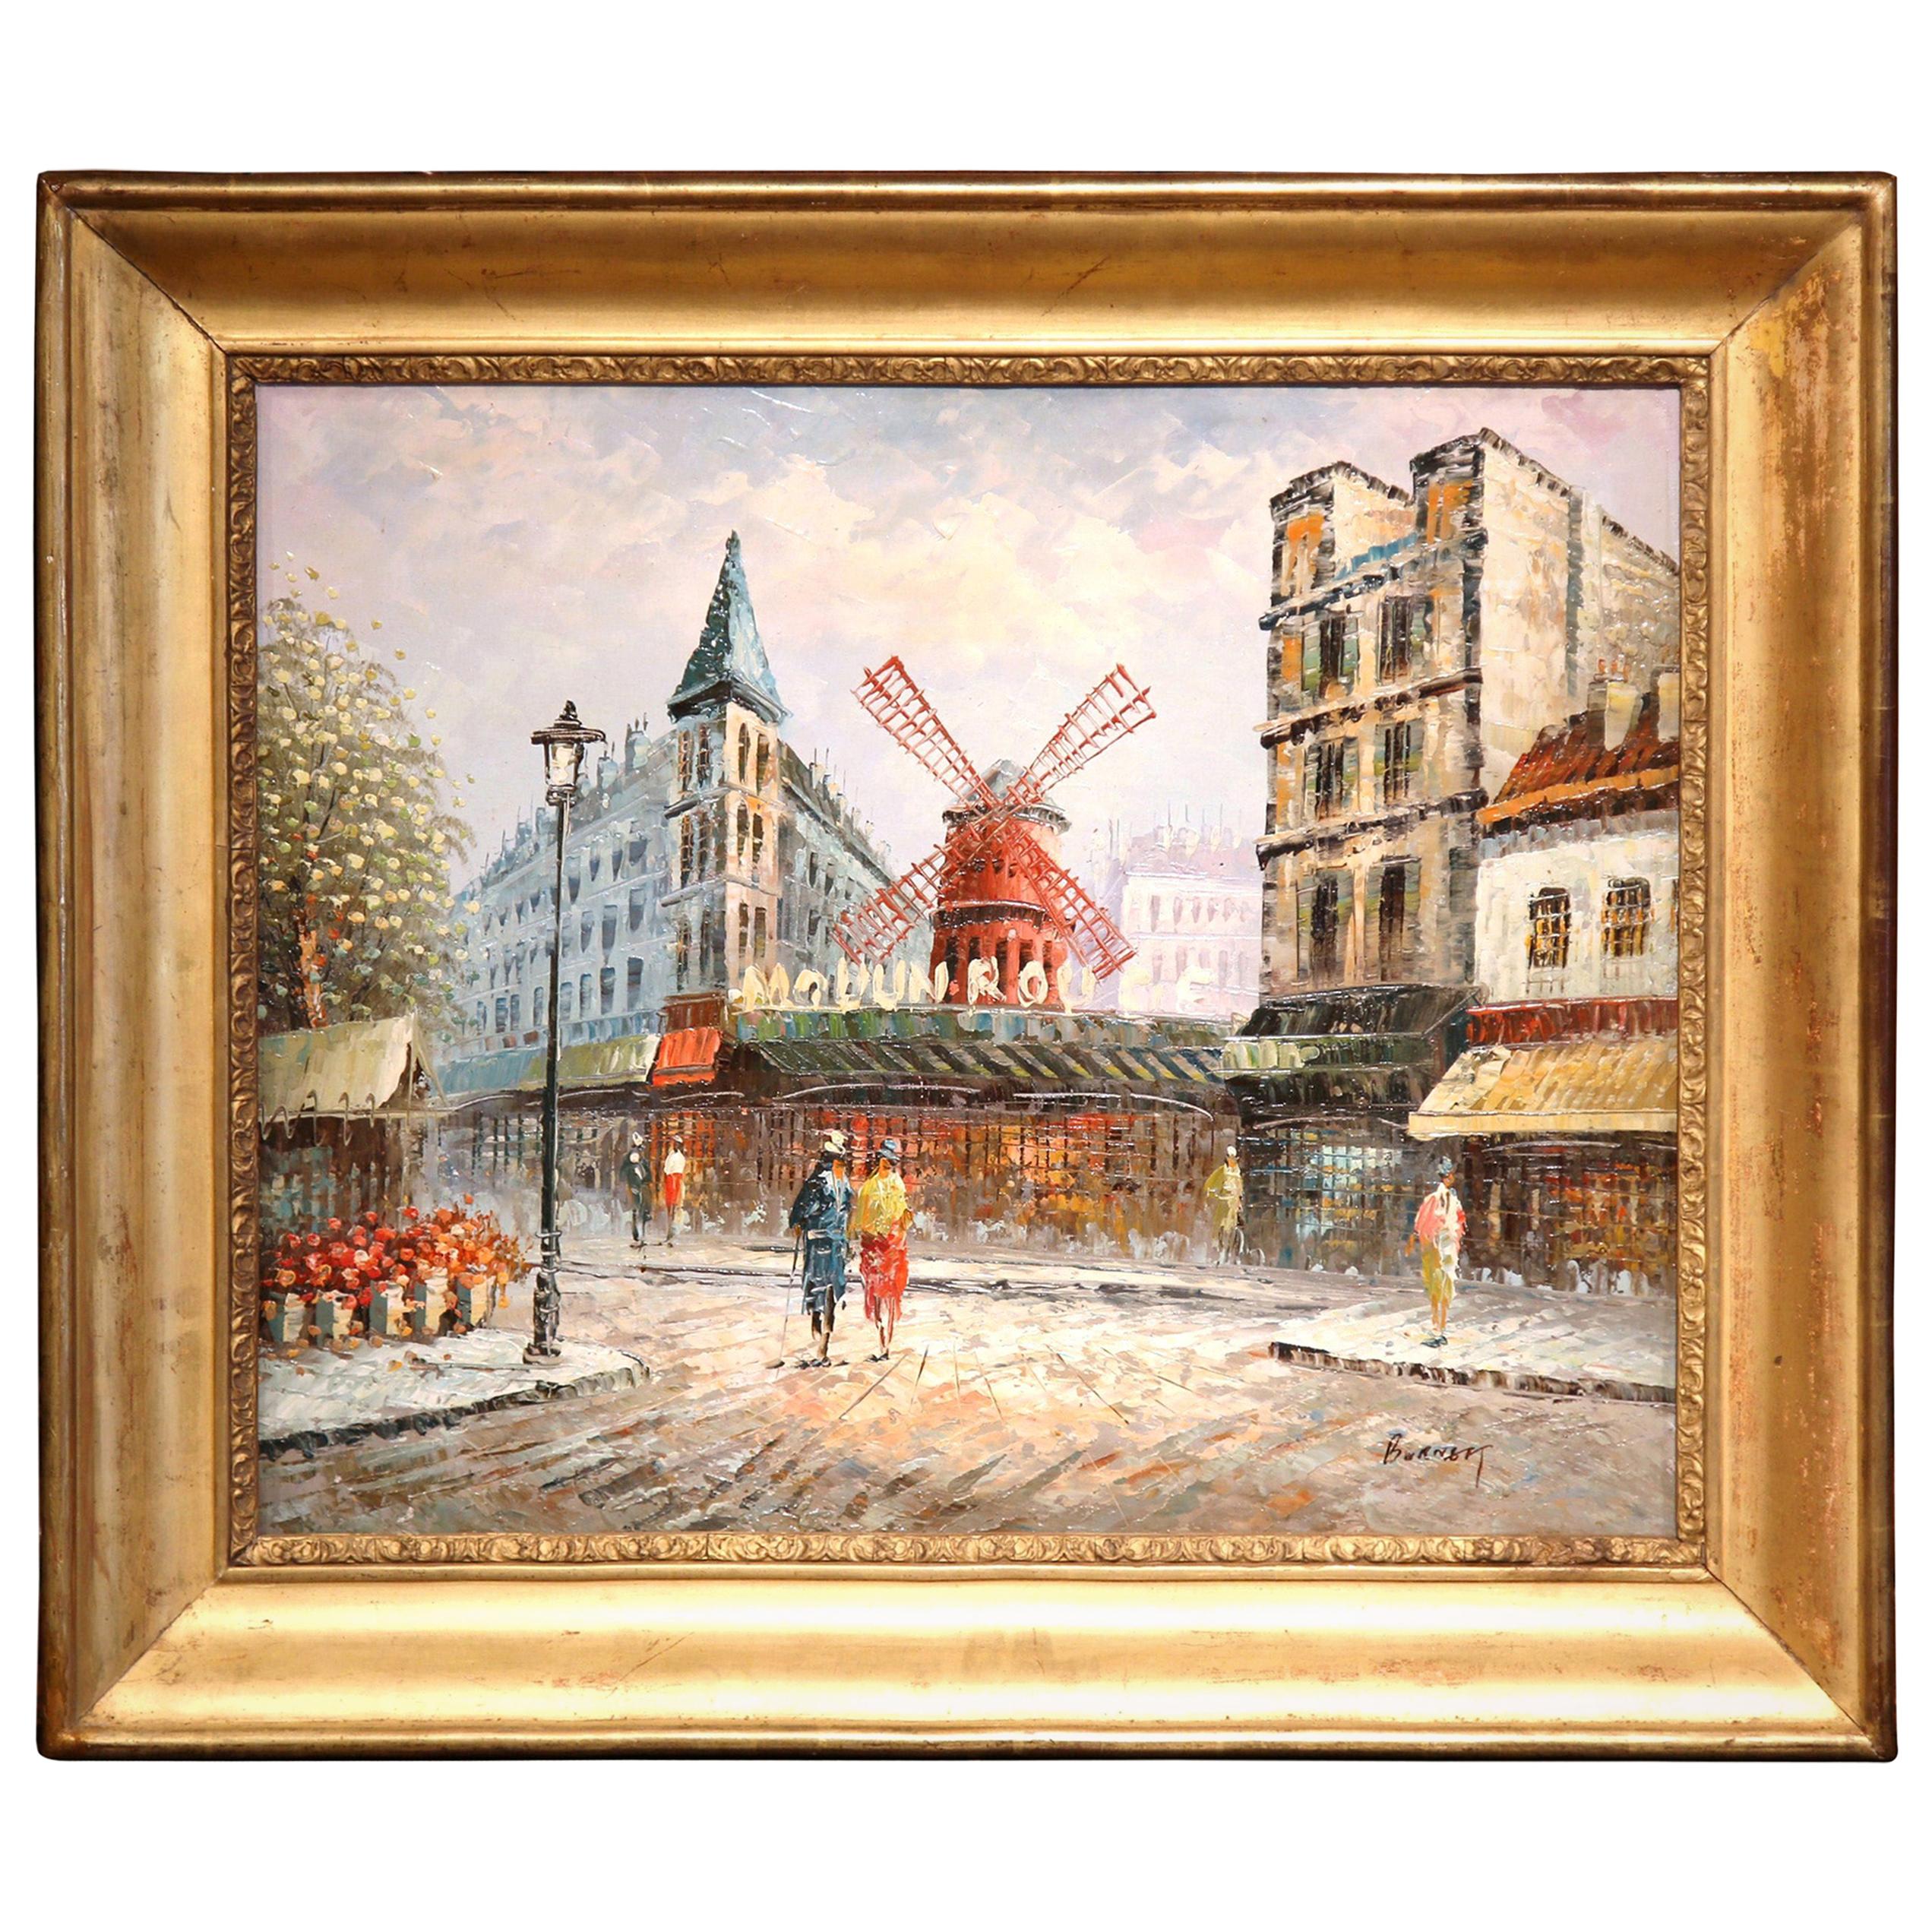 20th Century French Painting "Le Moulin Rouge" in Antique Frame Signed Burnau